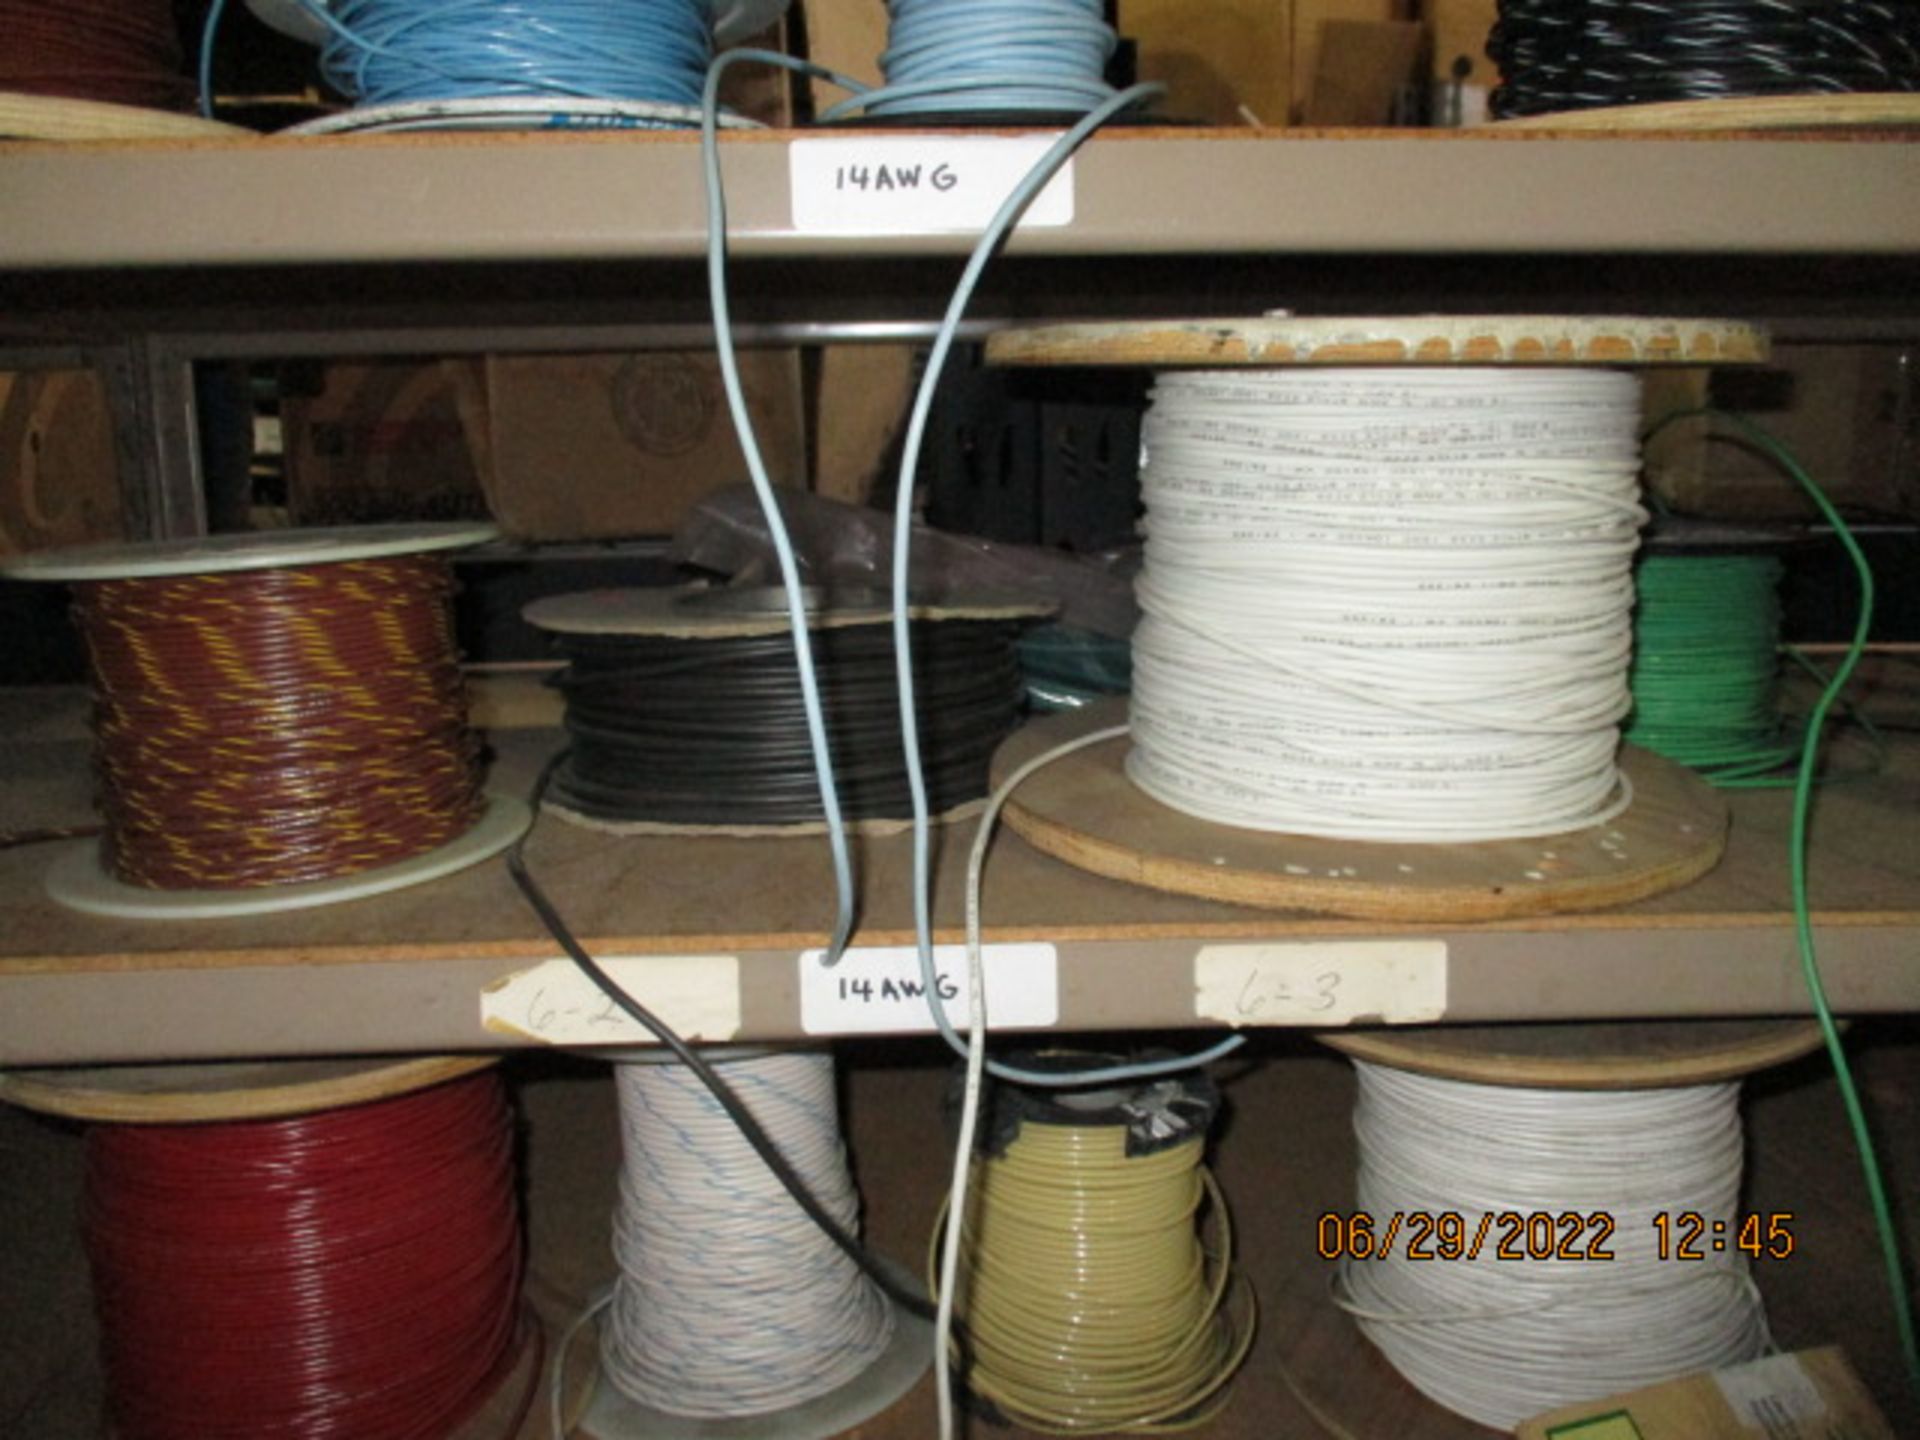 CONTENTS OF SHELVING UNIT CONSISTING OF ASSORTMENT OF CABLE/WIRE - Image 6 of 8